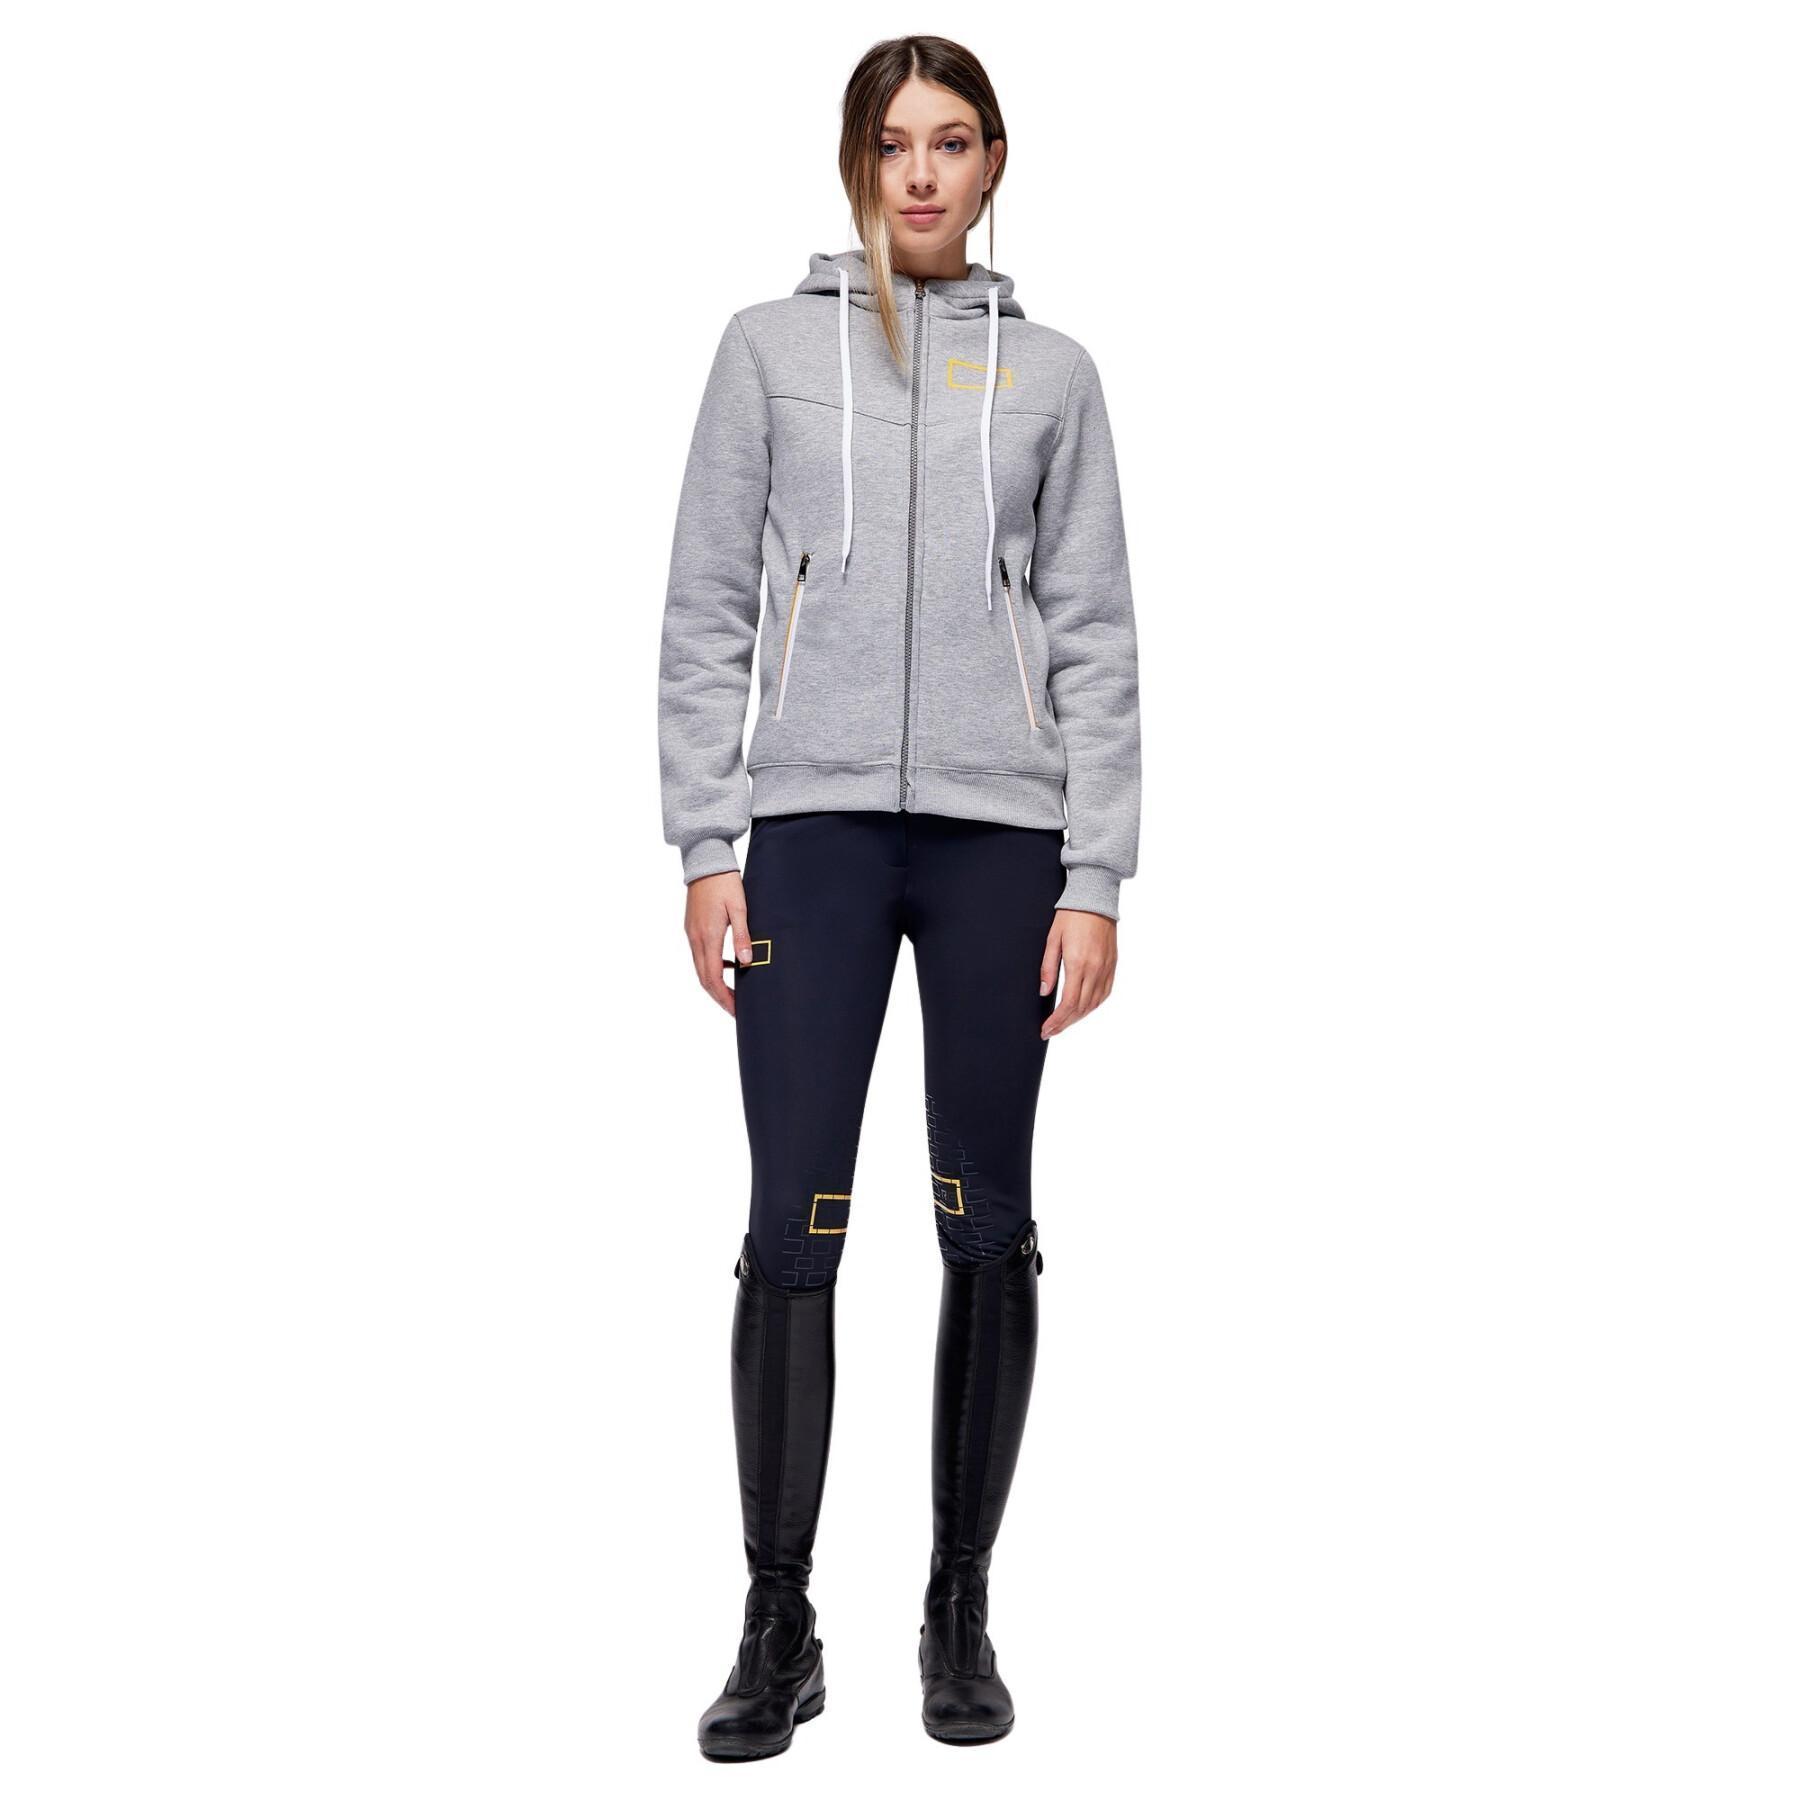 Women's zip-up hooded riding jacket RG Italy